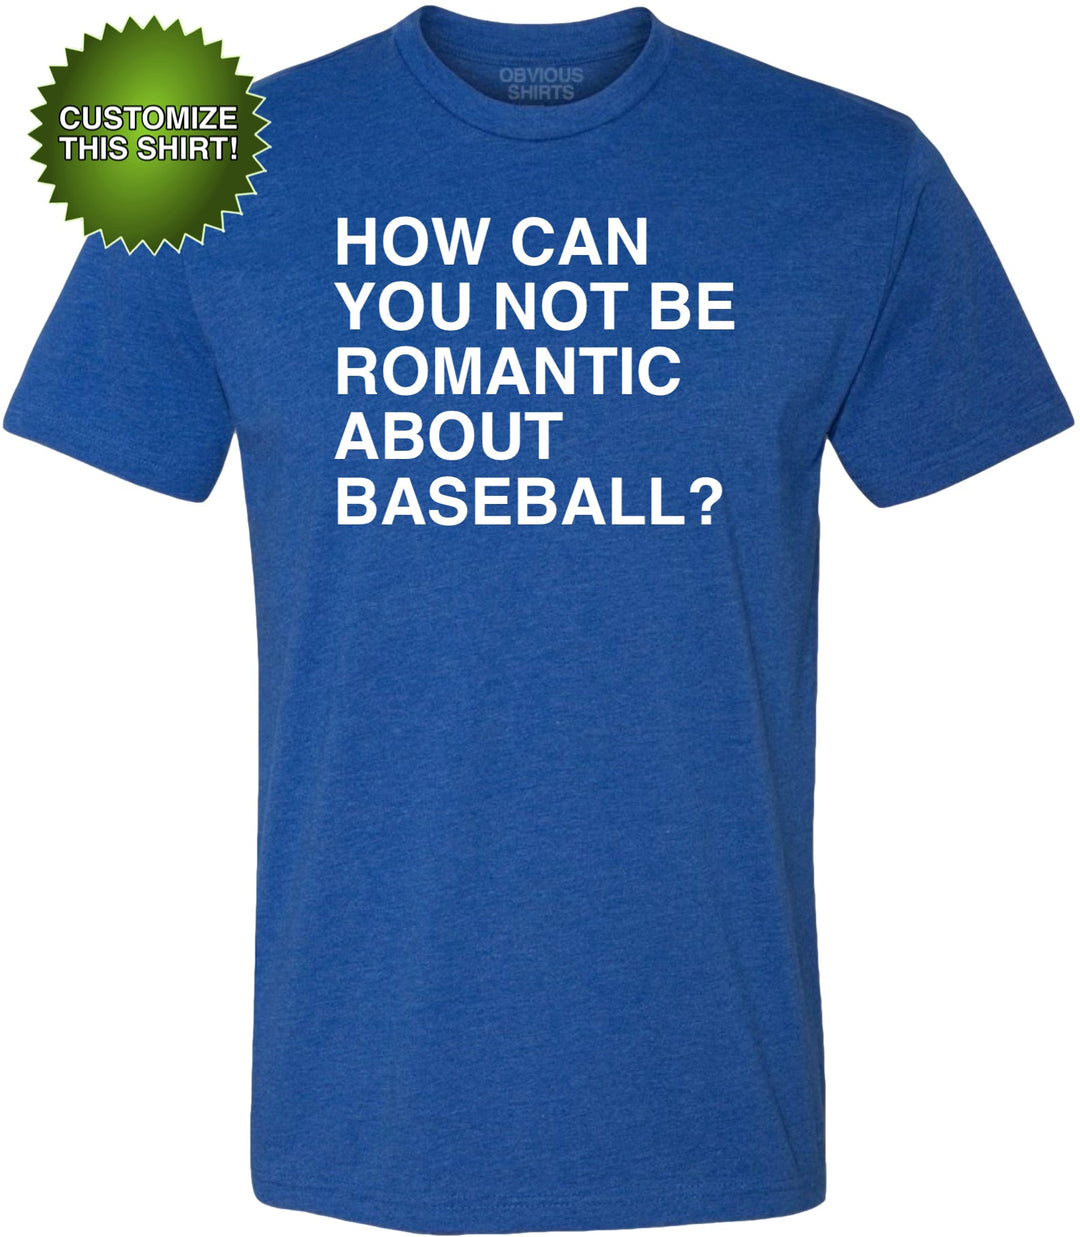 HOW CAN YOU NOT BE ROMANTIC ABOUT BASEBALL? (CUSTOMIZE) - OBVIOUS SHIRTS